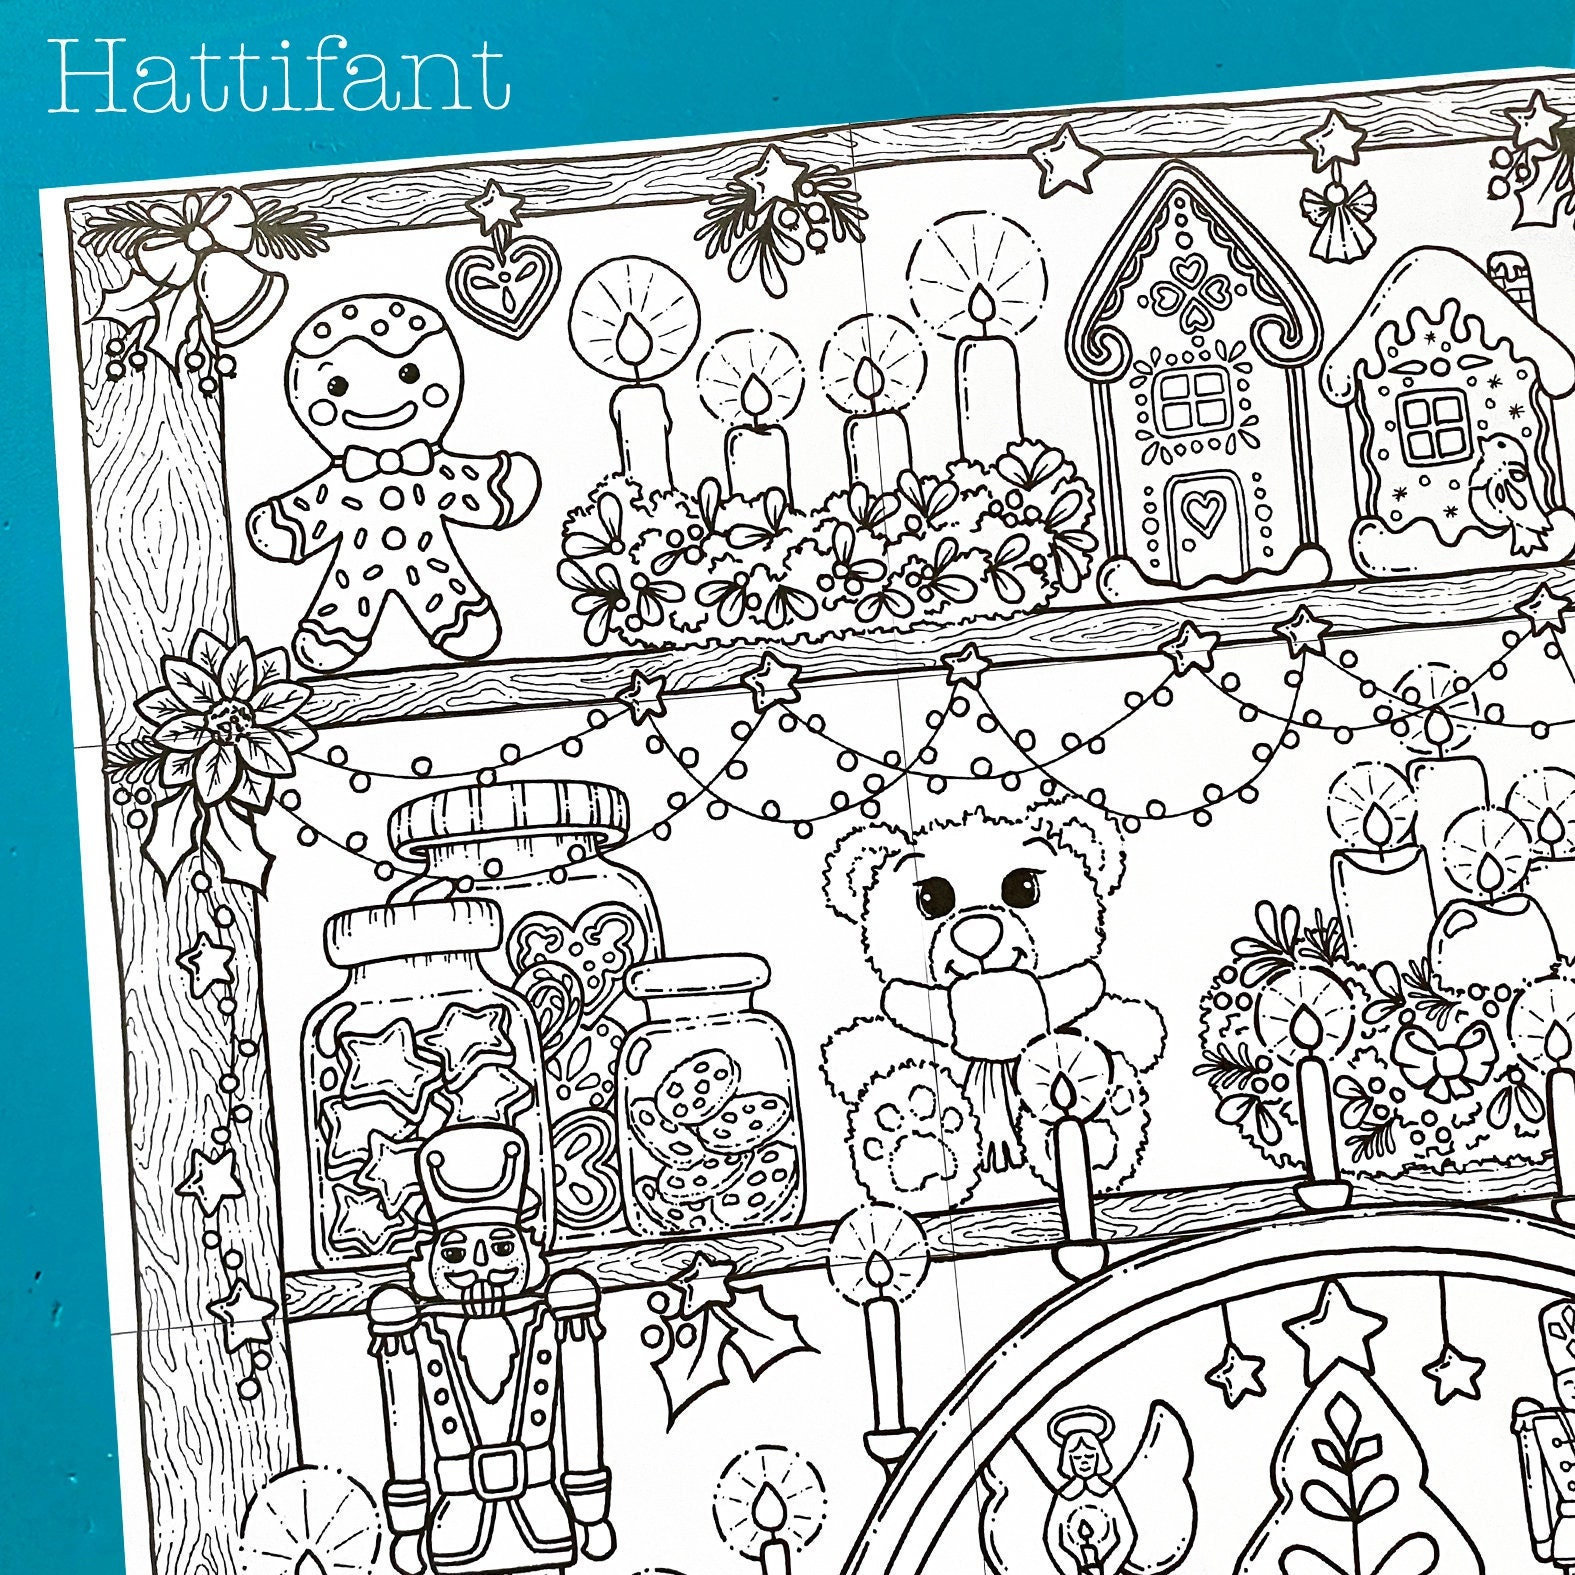 Winter Coloring Pages - Hattifant